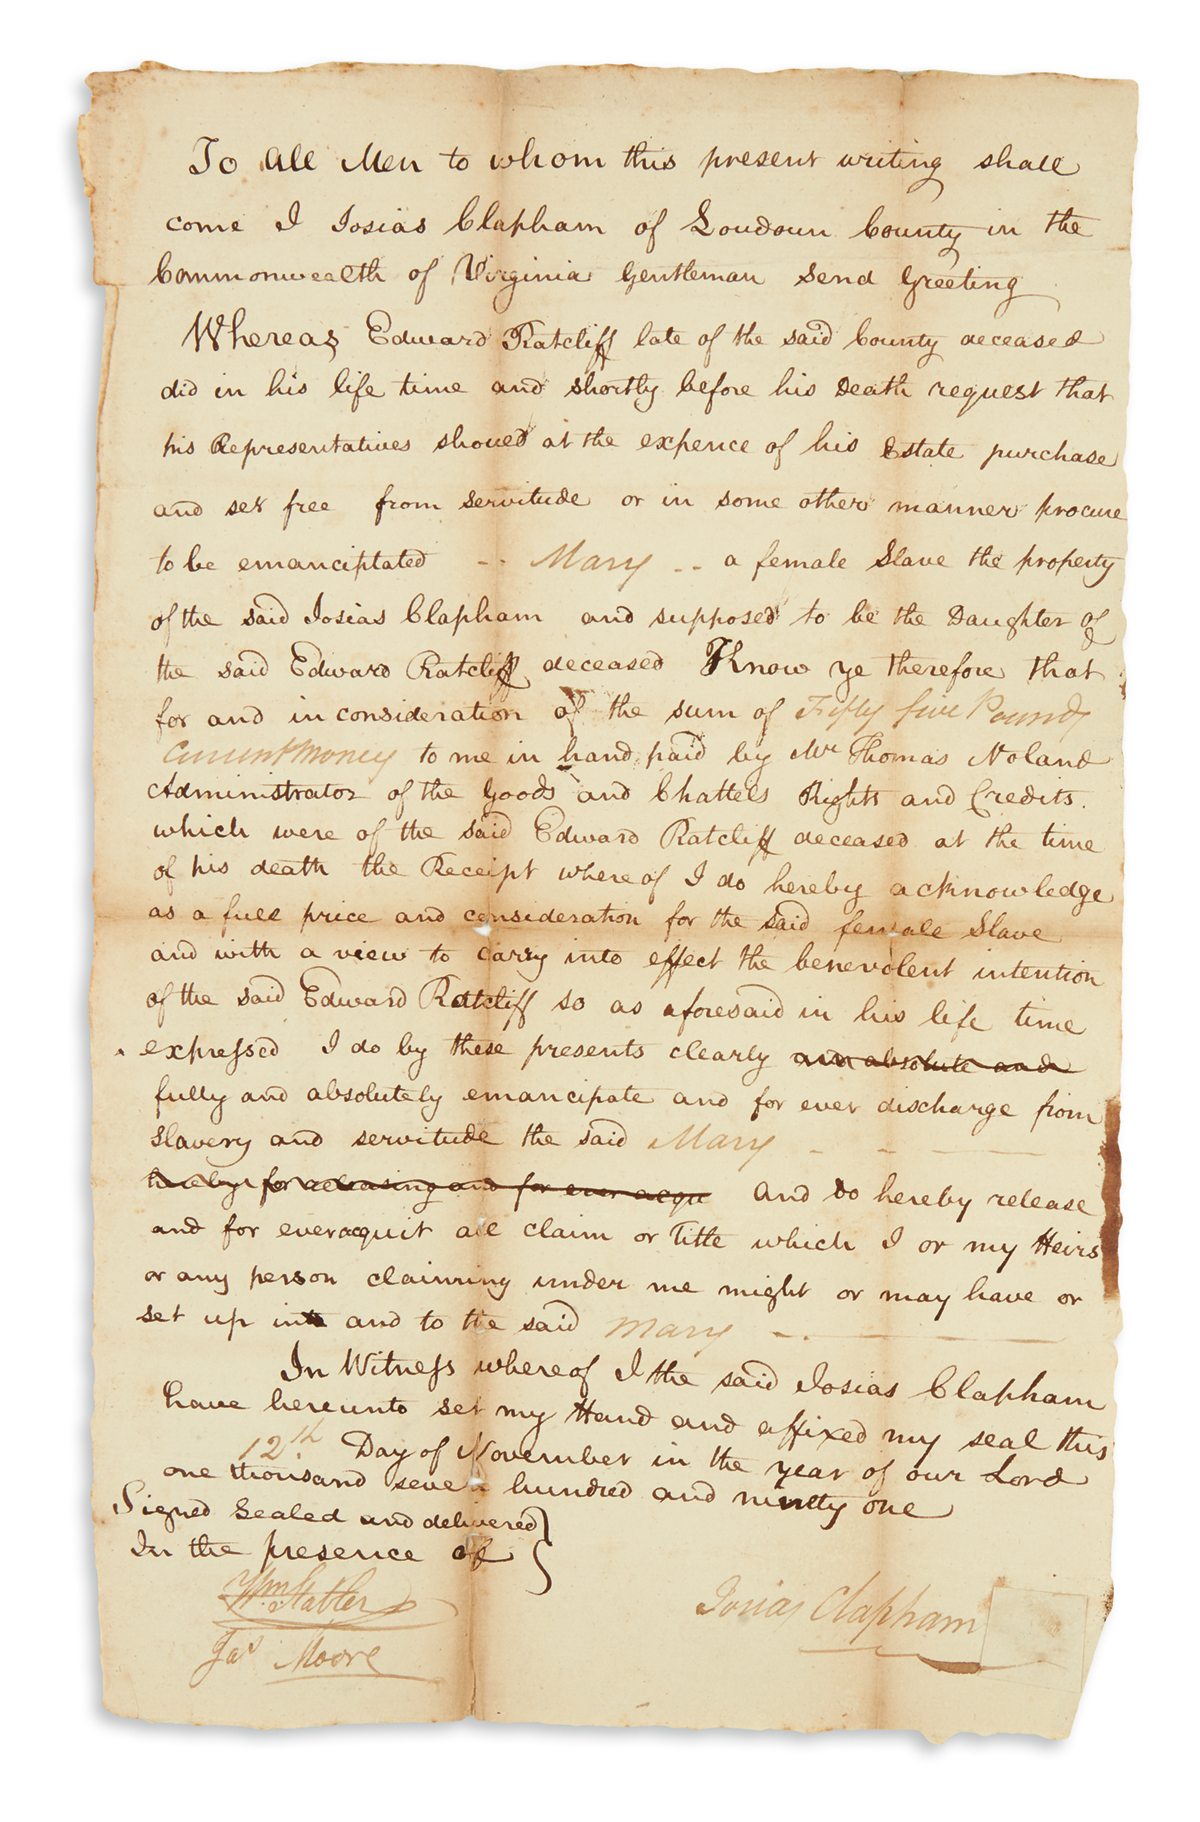 (SLAVERY AND ABOLITION.) Clapham, Josias. Manumission deed from the estate of the freed womans owner and father.